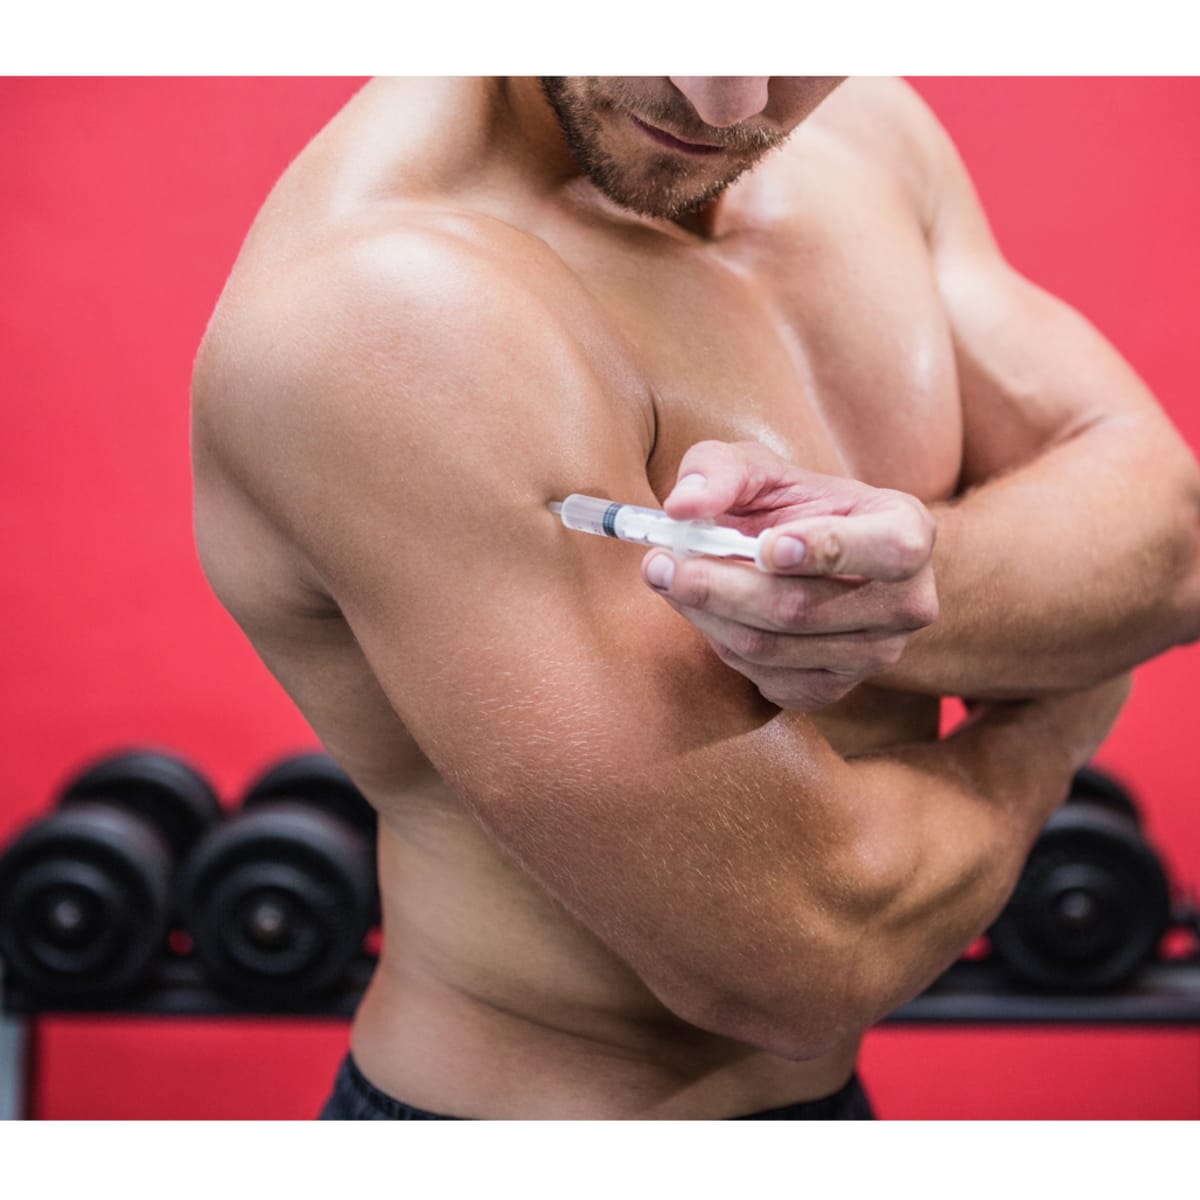 Here's What Steroids Actually Do to Your Body - Men's Journal